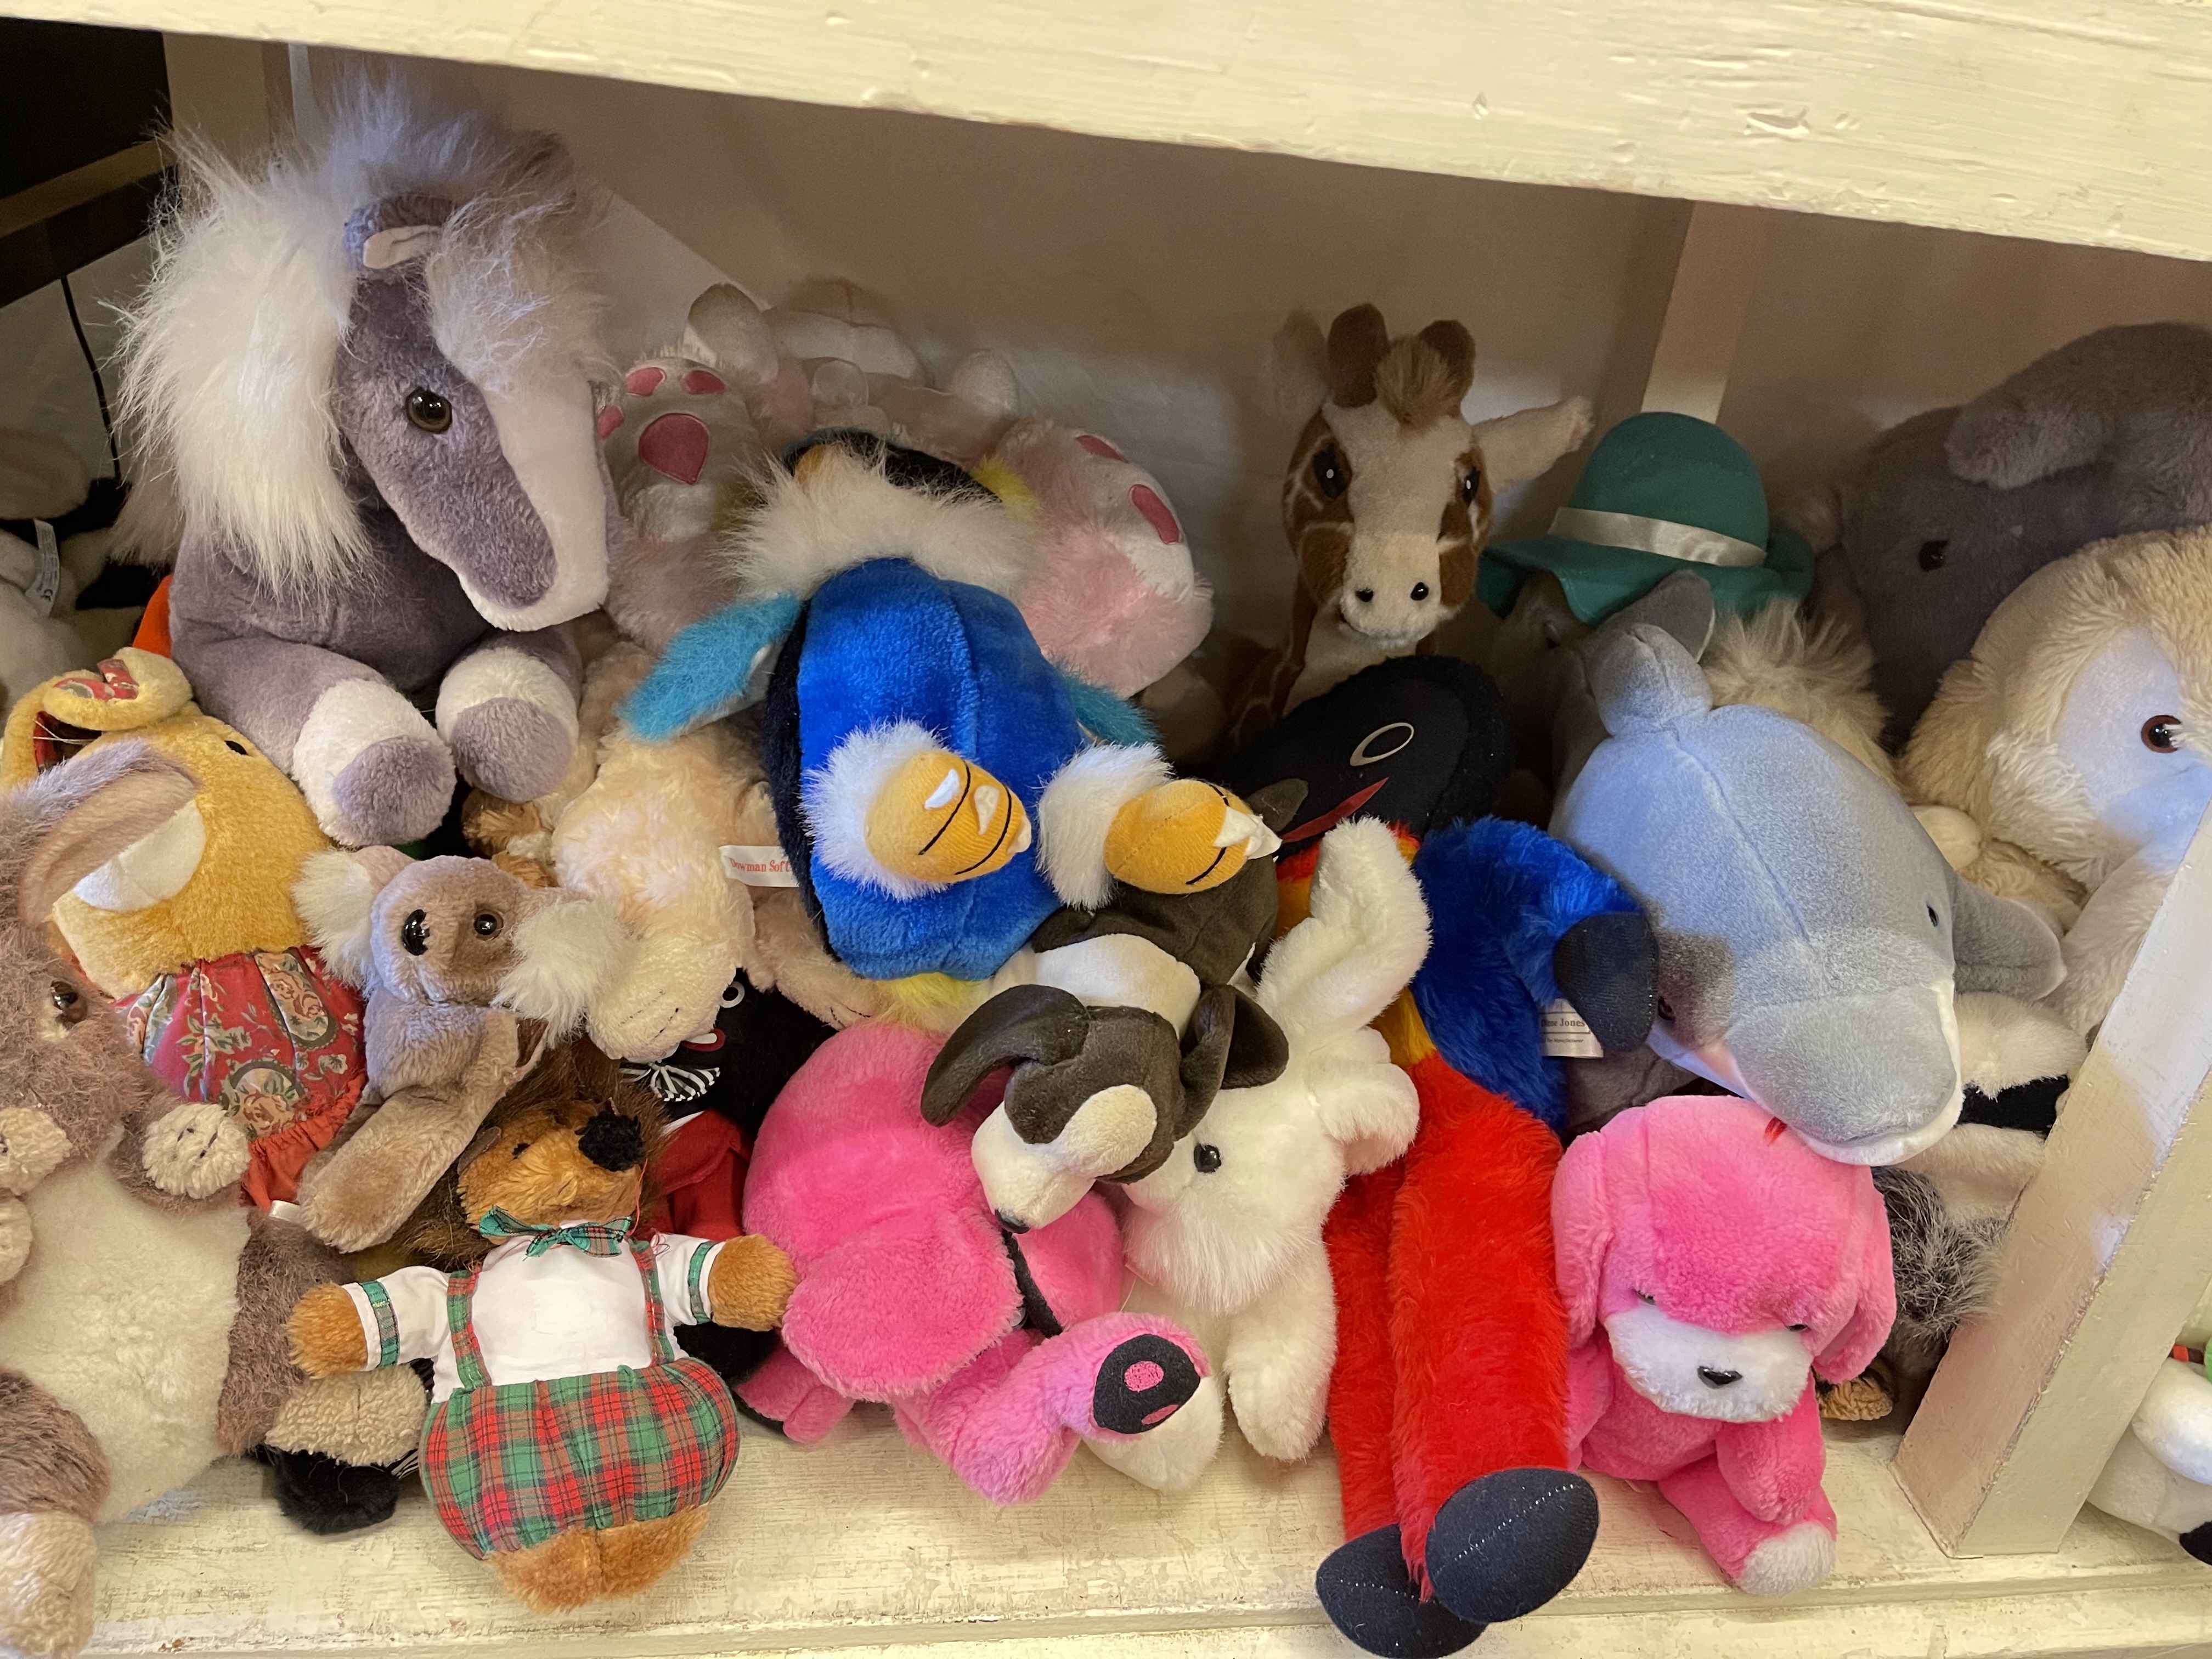 Large collection of soft toys including various novelty teddy bears, etc. - Image 2 of 4